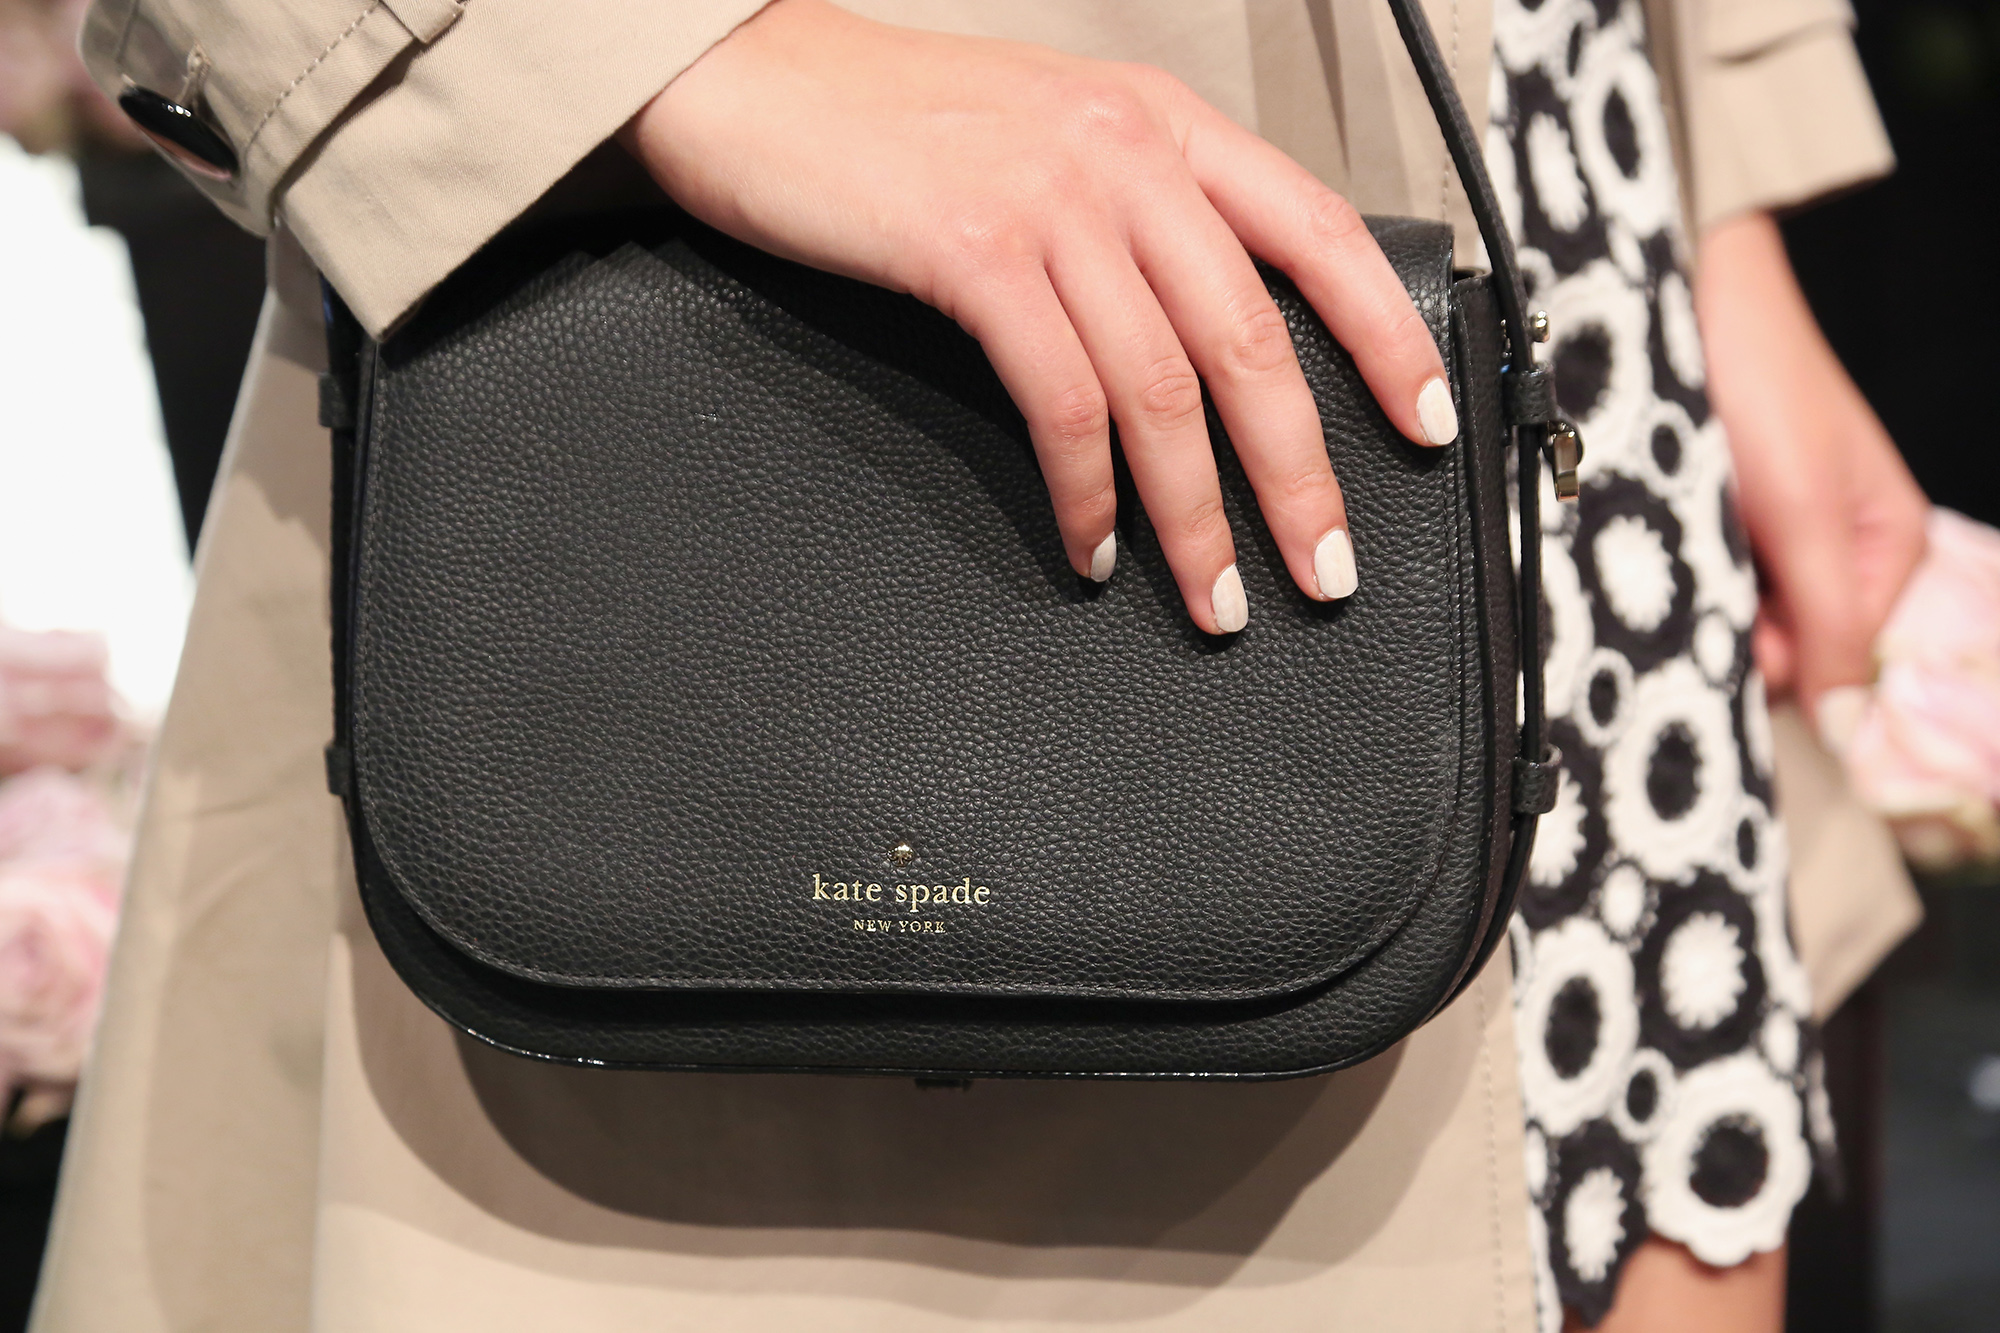 Kate Spade Accessories on Sale at Nordstrom Rack 2019